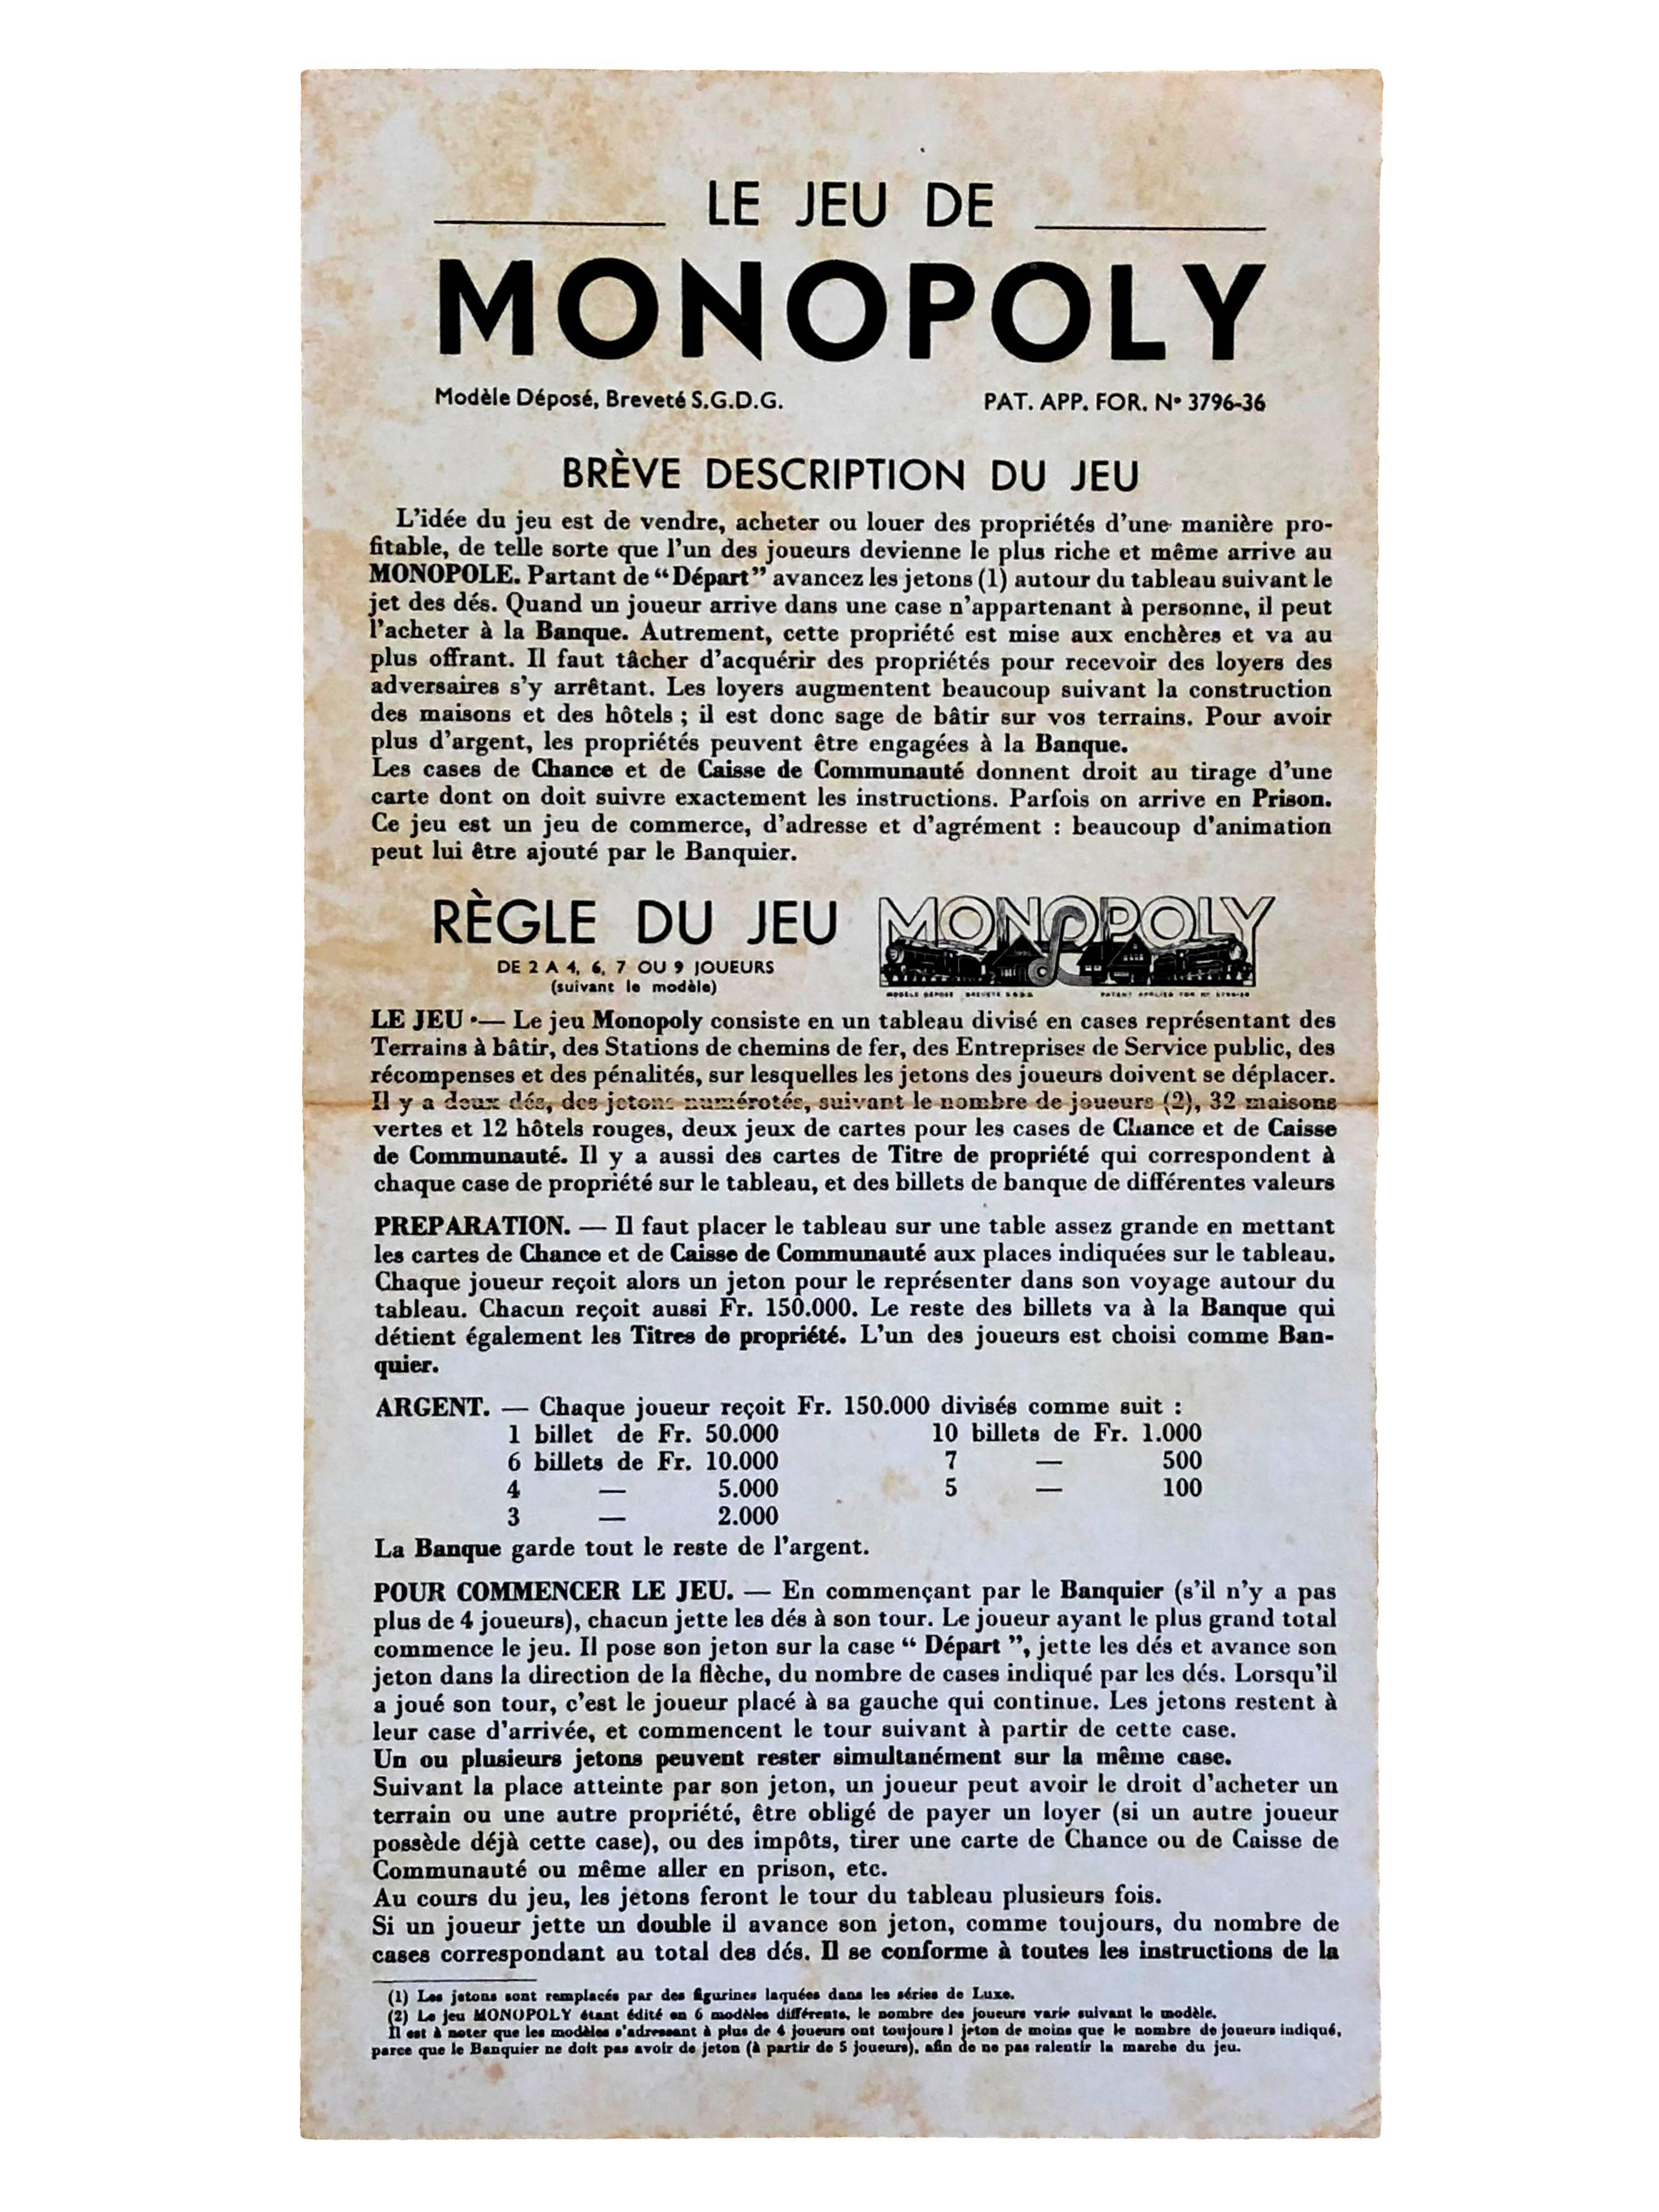 Vintage Monopoly Game - 1957 - French Edition - Rare For Sale 4